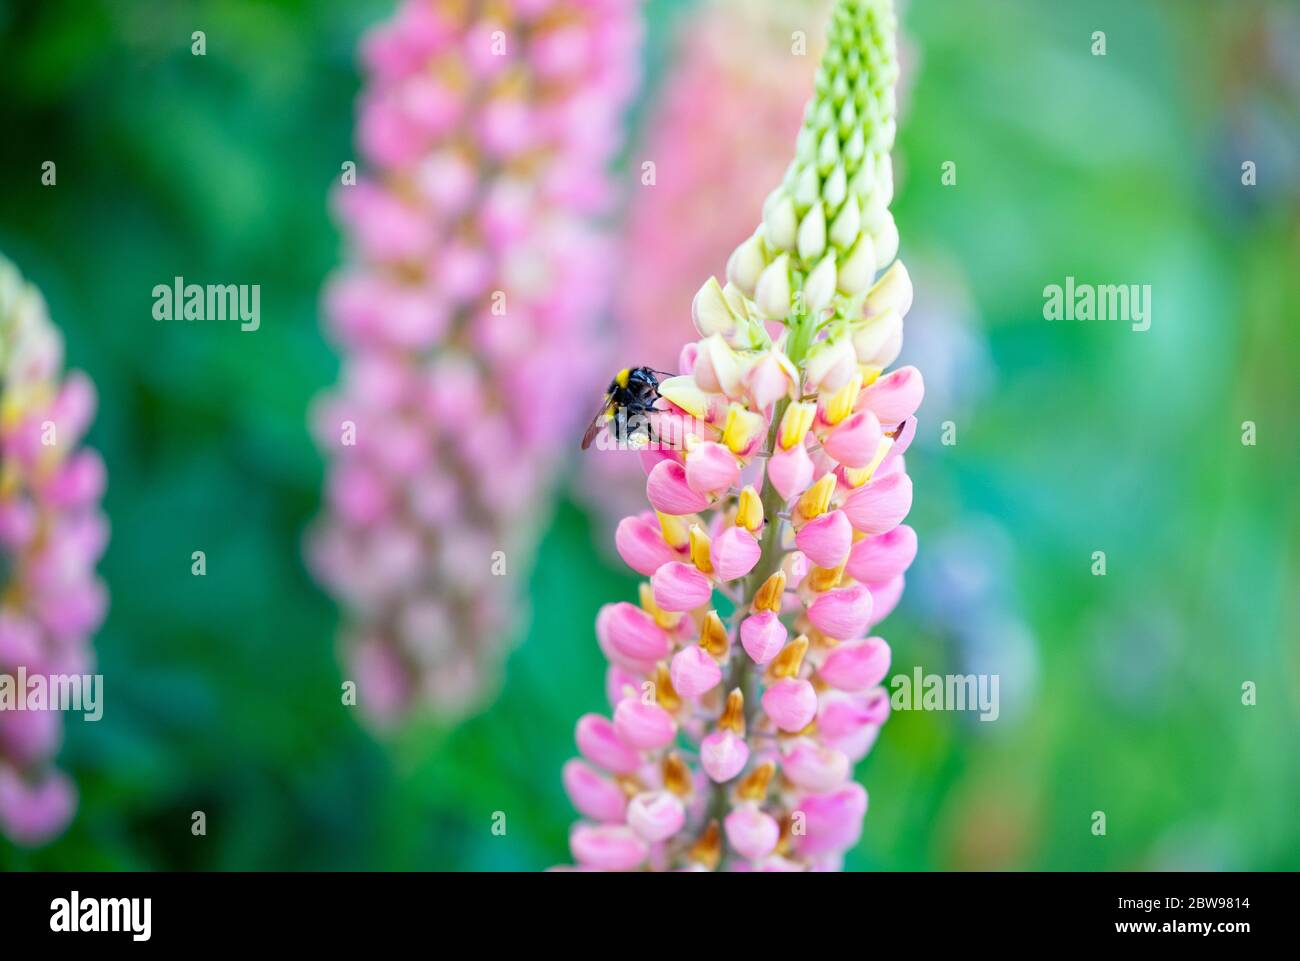 A bee approaches a flower. Stock Photo